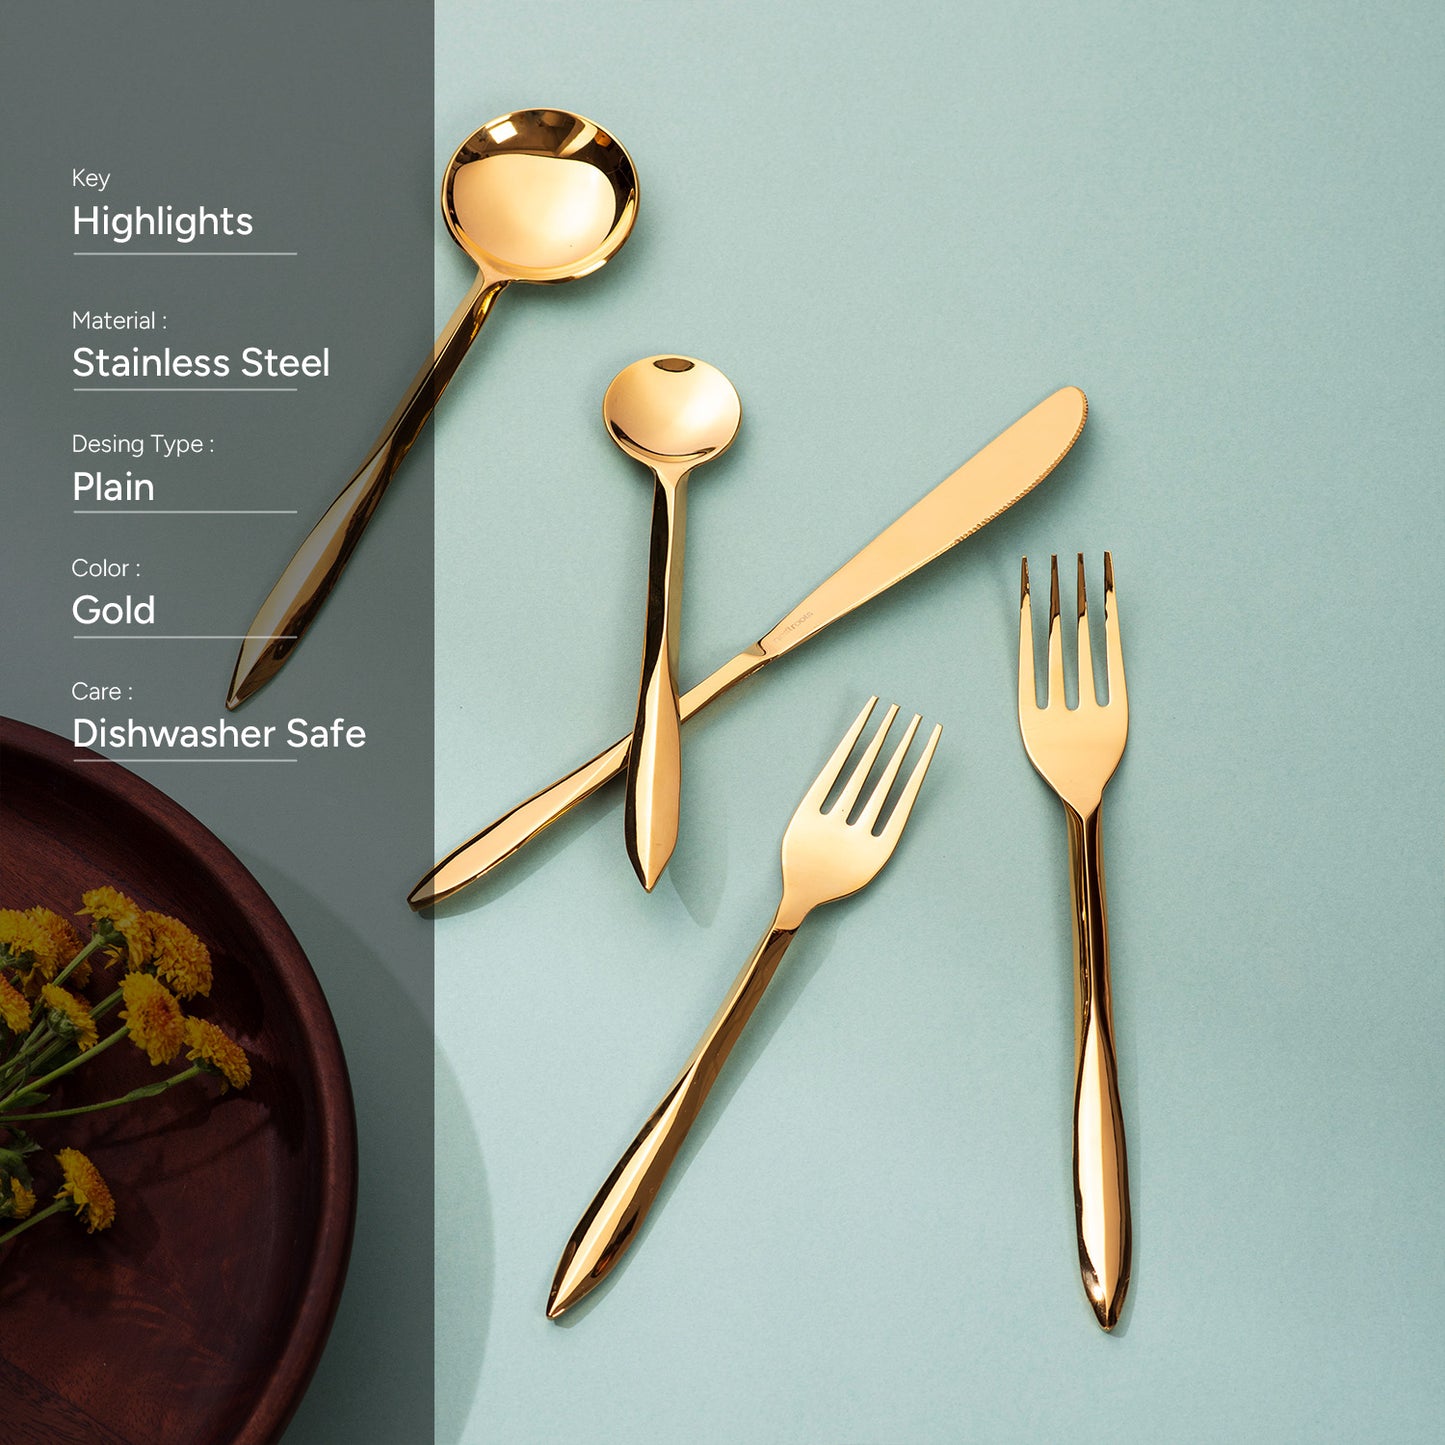 Pinnacle Precision: Set of 5 Cutlery with Pointed Handles